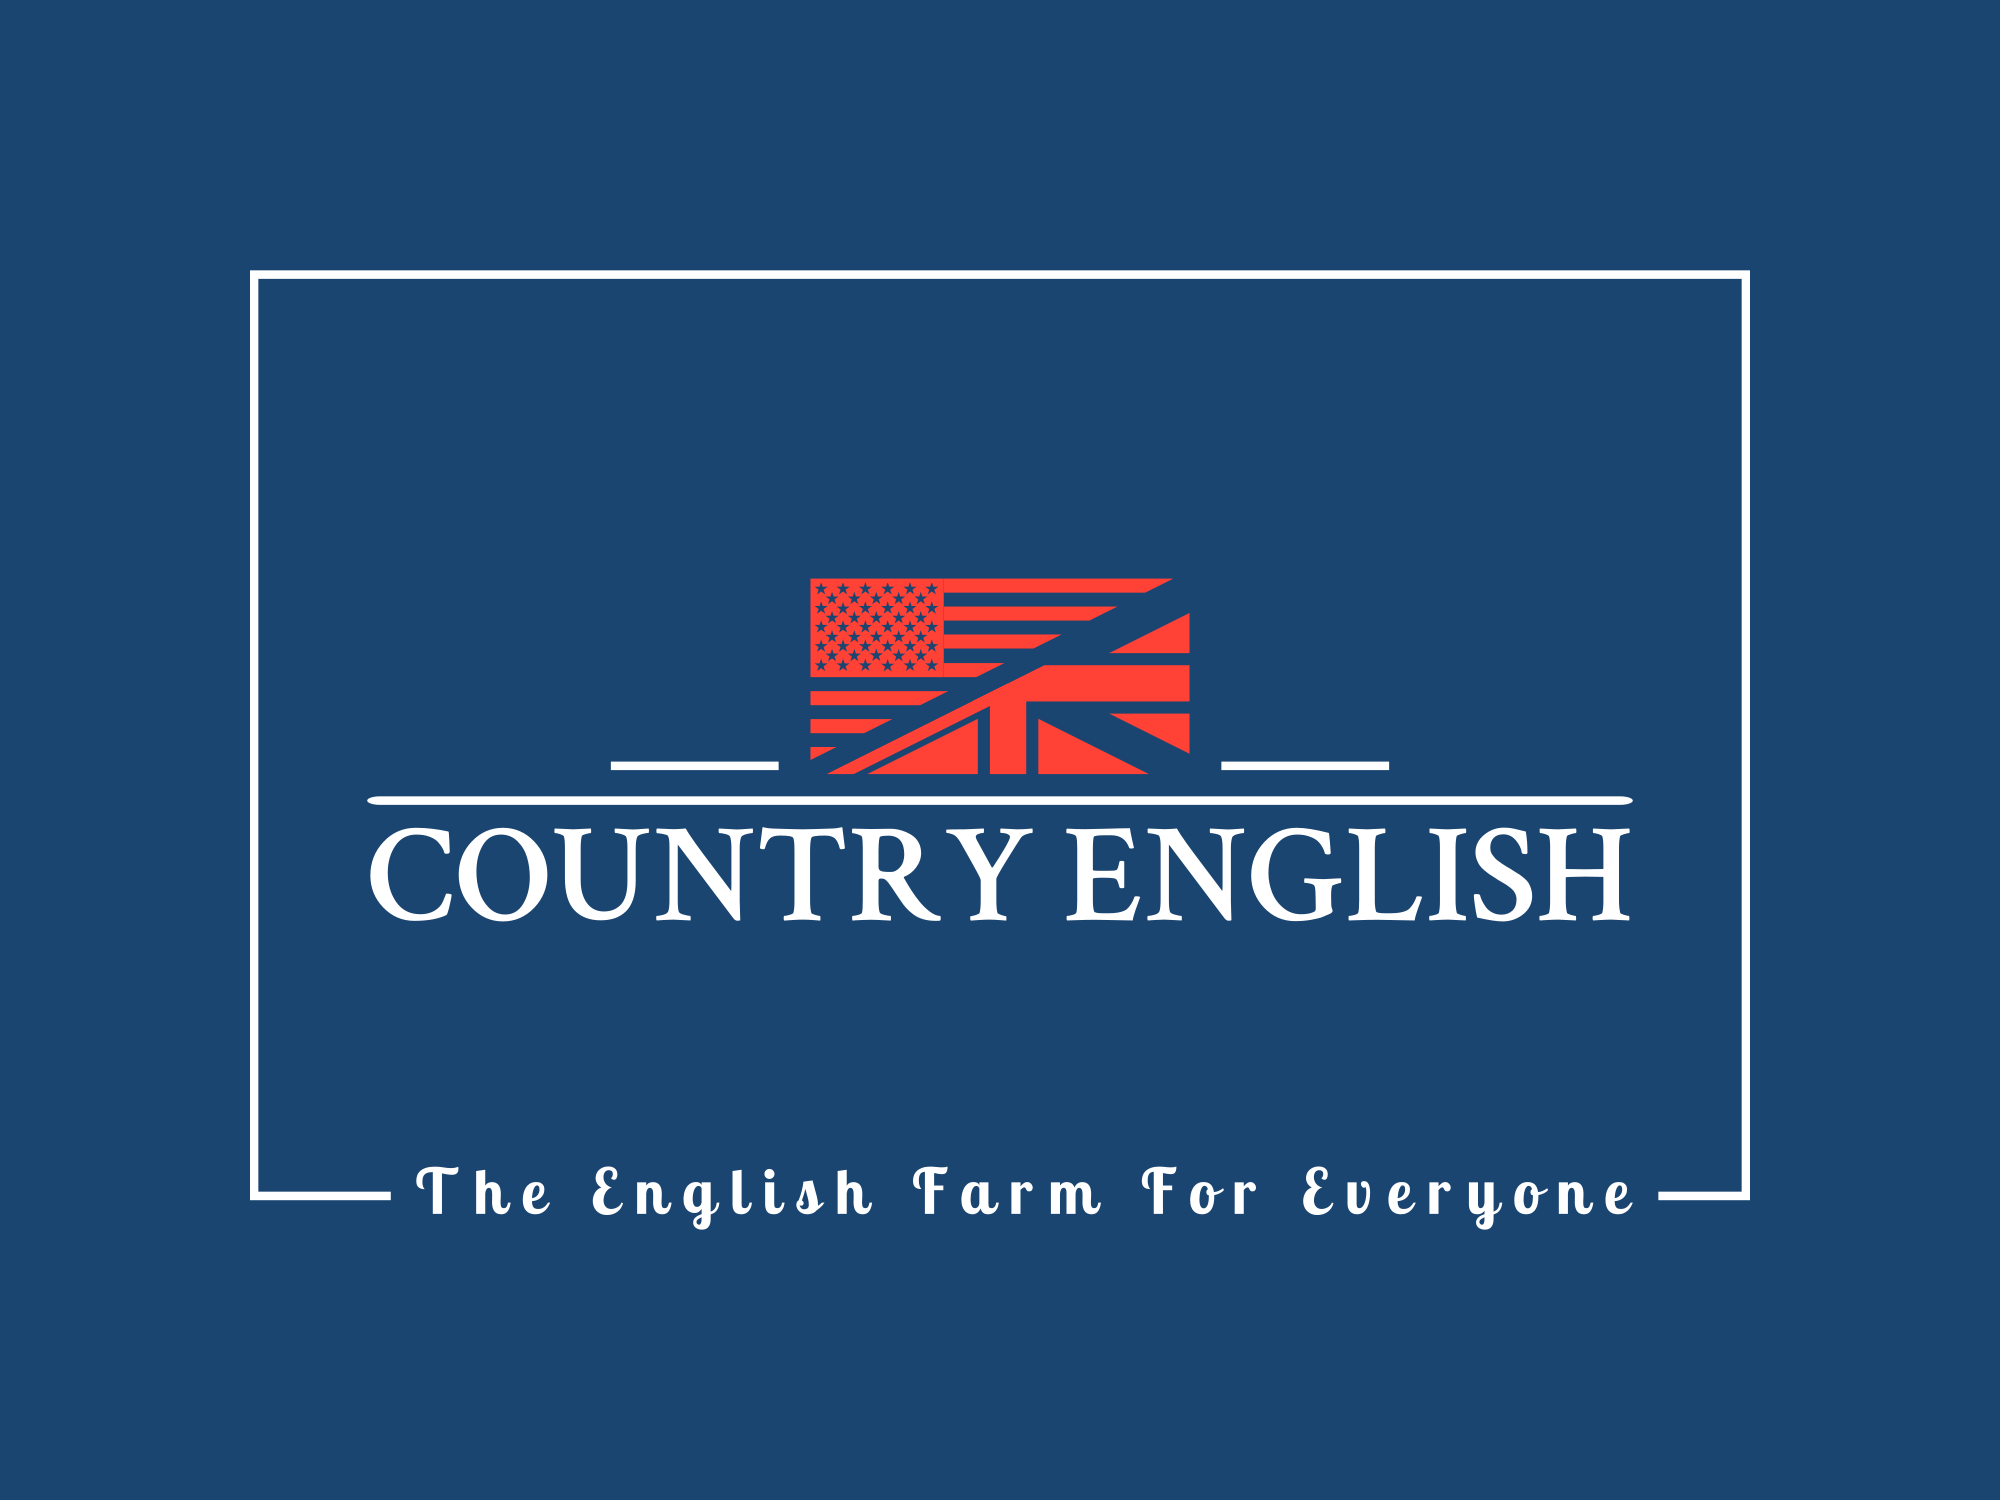 Country English – The English Farm for Everyone